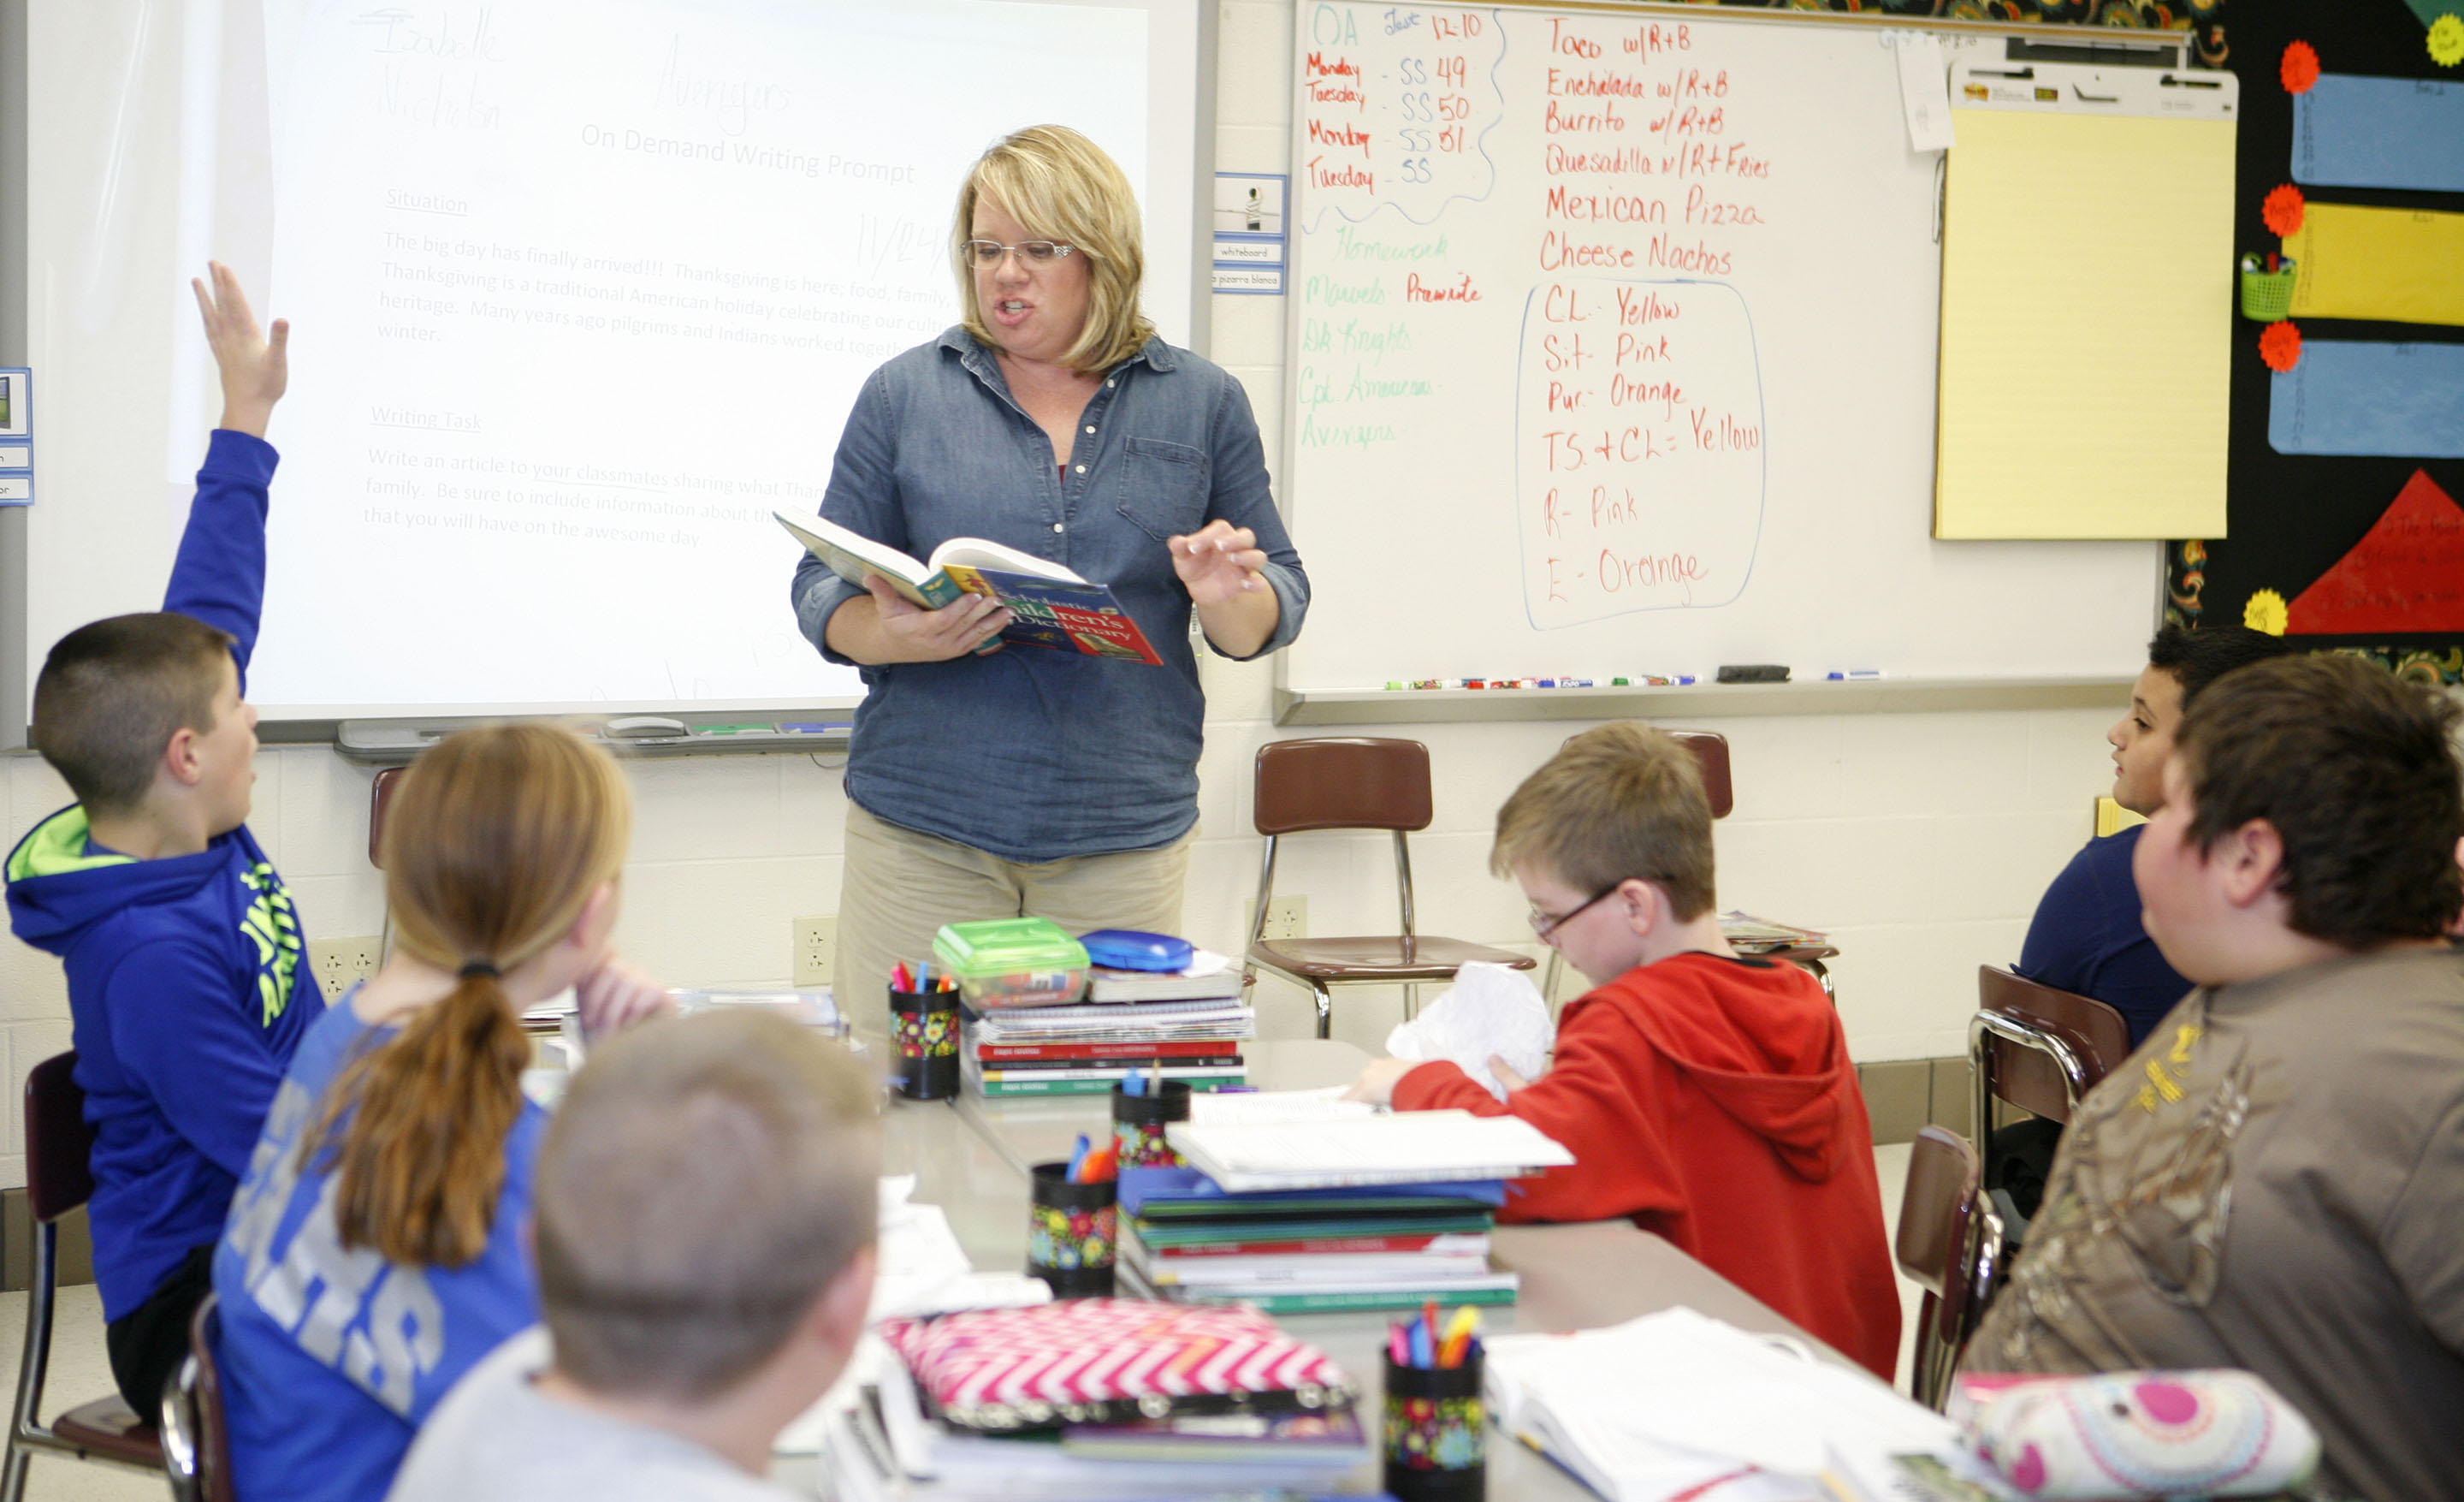 Rachel Hacker, a 5th-grade teacher at Bush Elementary School (Laurel County), fields a question from a student as her class works on an on-demand writing project. Bush Elementary is one of four public schools in Kentucky to be named a National Blue Ribbon School in 2015 by the U.S. Department of Education. Photo by Mike Marsee, Dec. 7, 2015